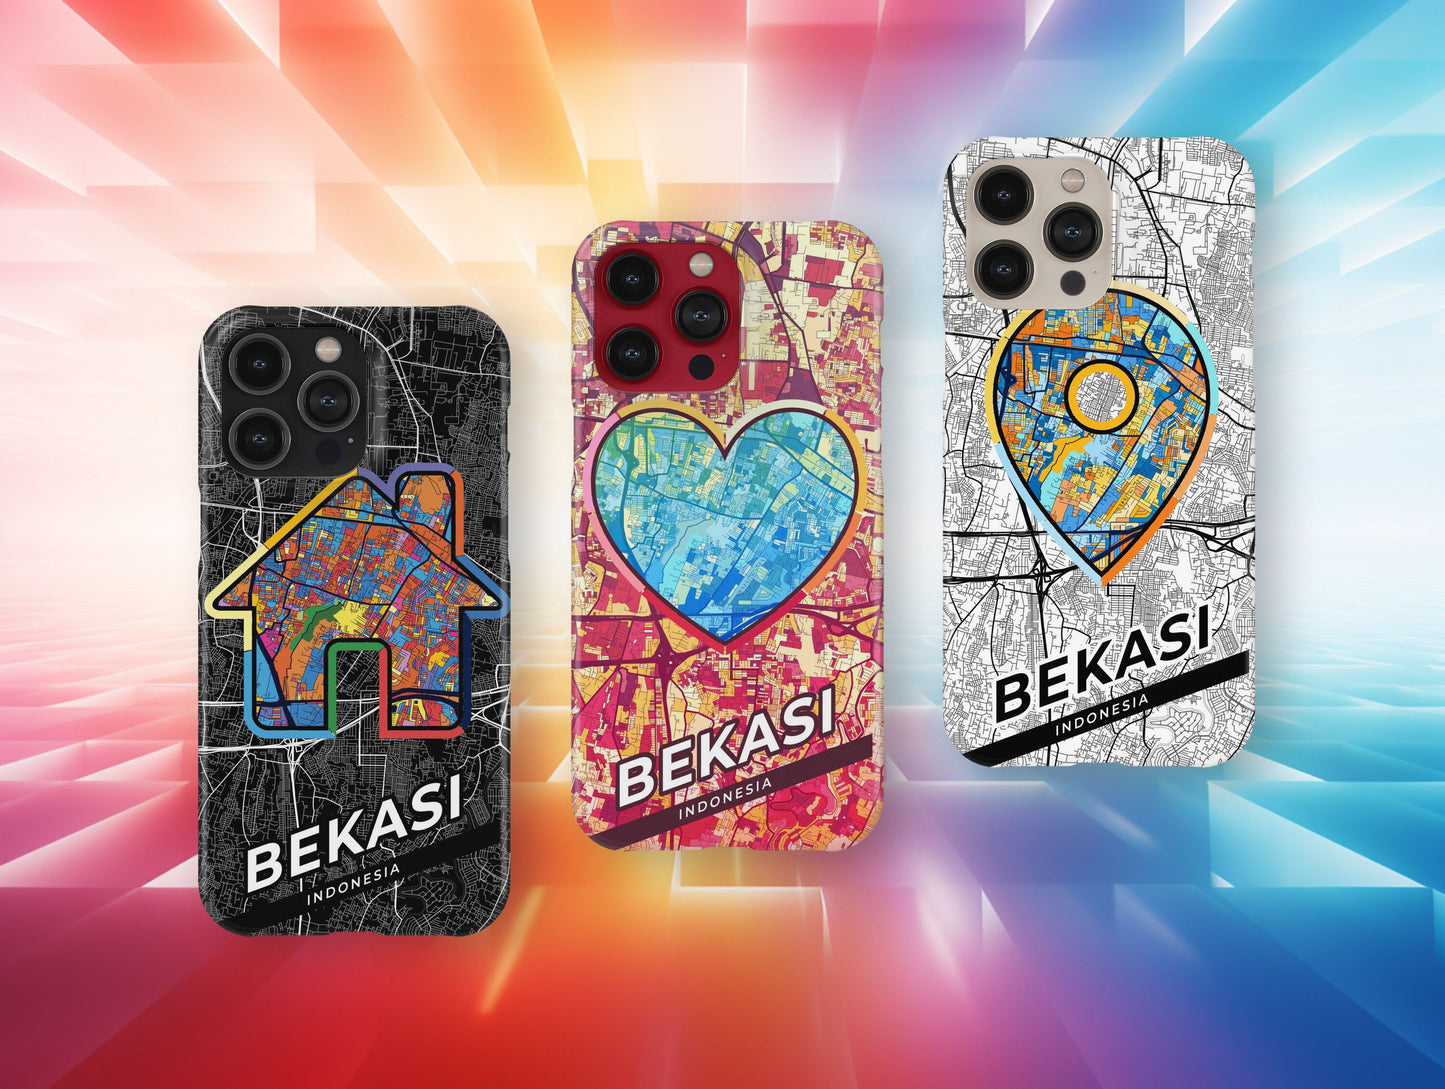 Bekasi Indonesia slim phone case with colorful icon. Birthday, wedding or housewarming gift. Couple match cases.